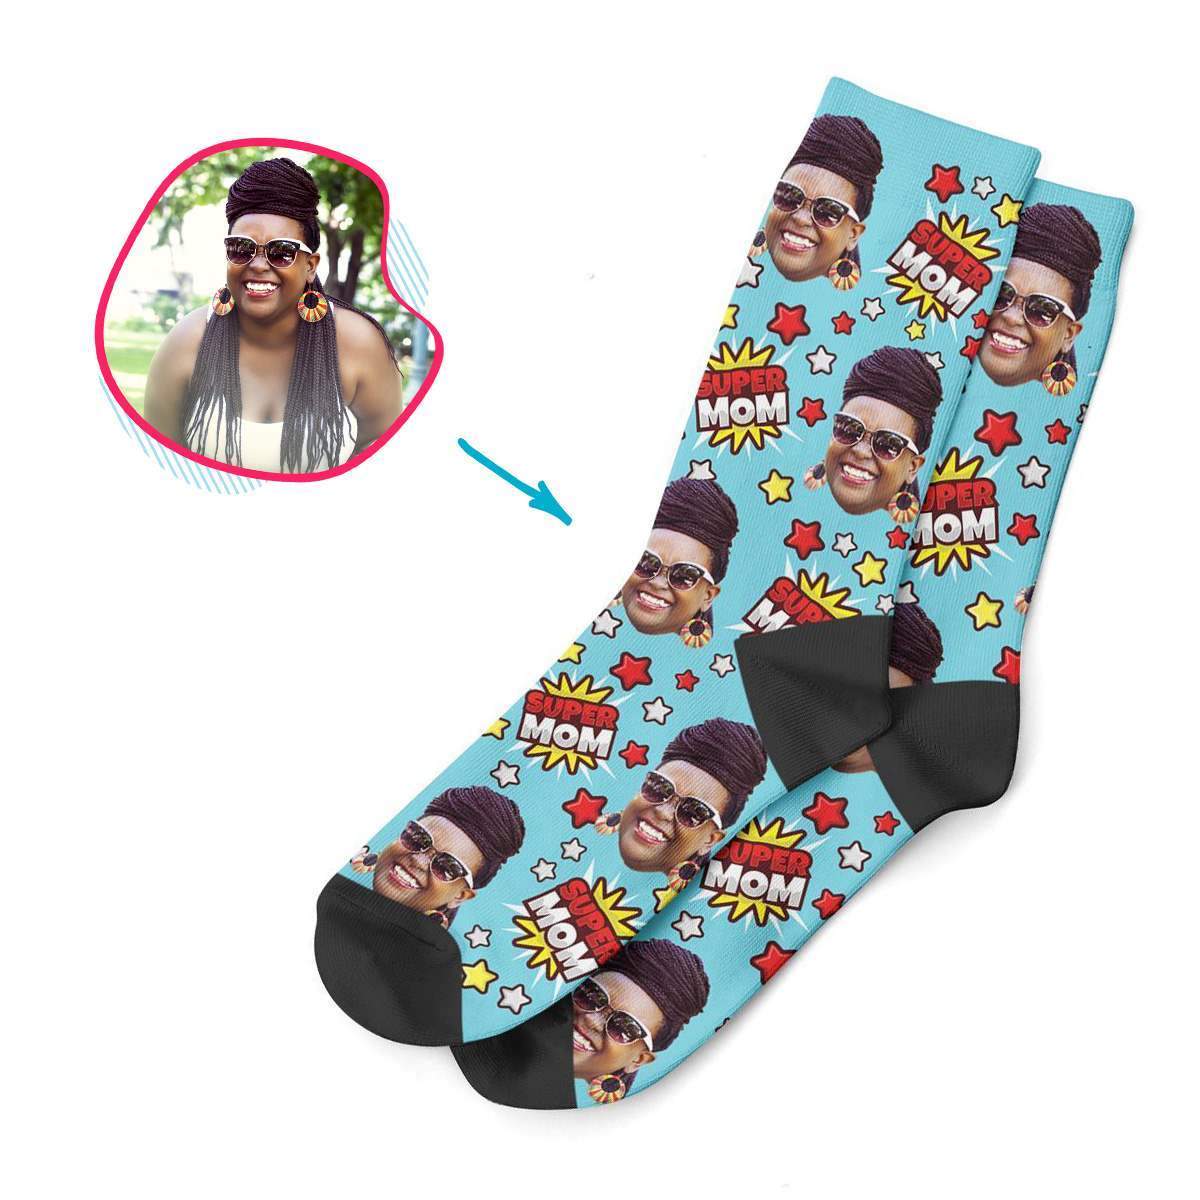 blue Super Mom socks personalized with photo of face printed on them